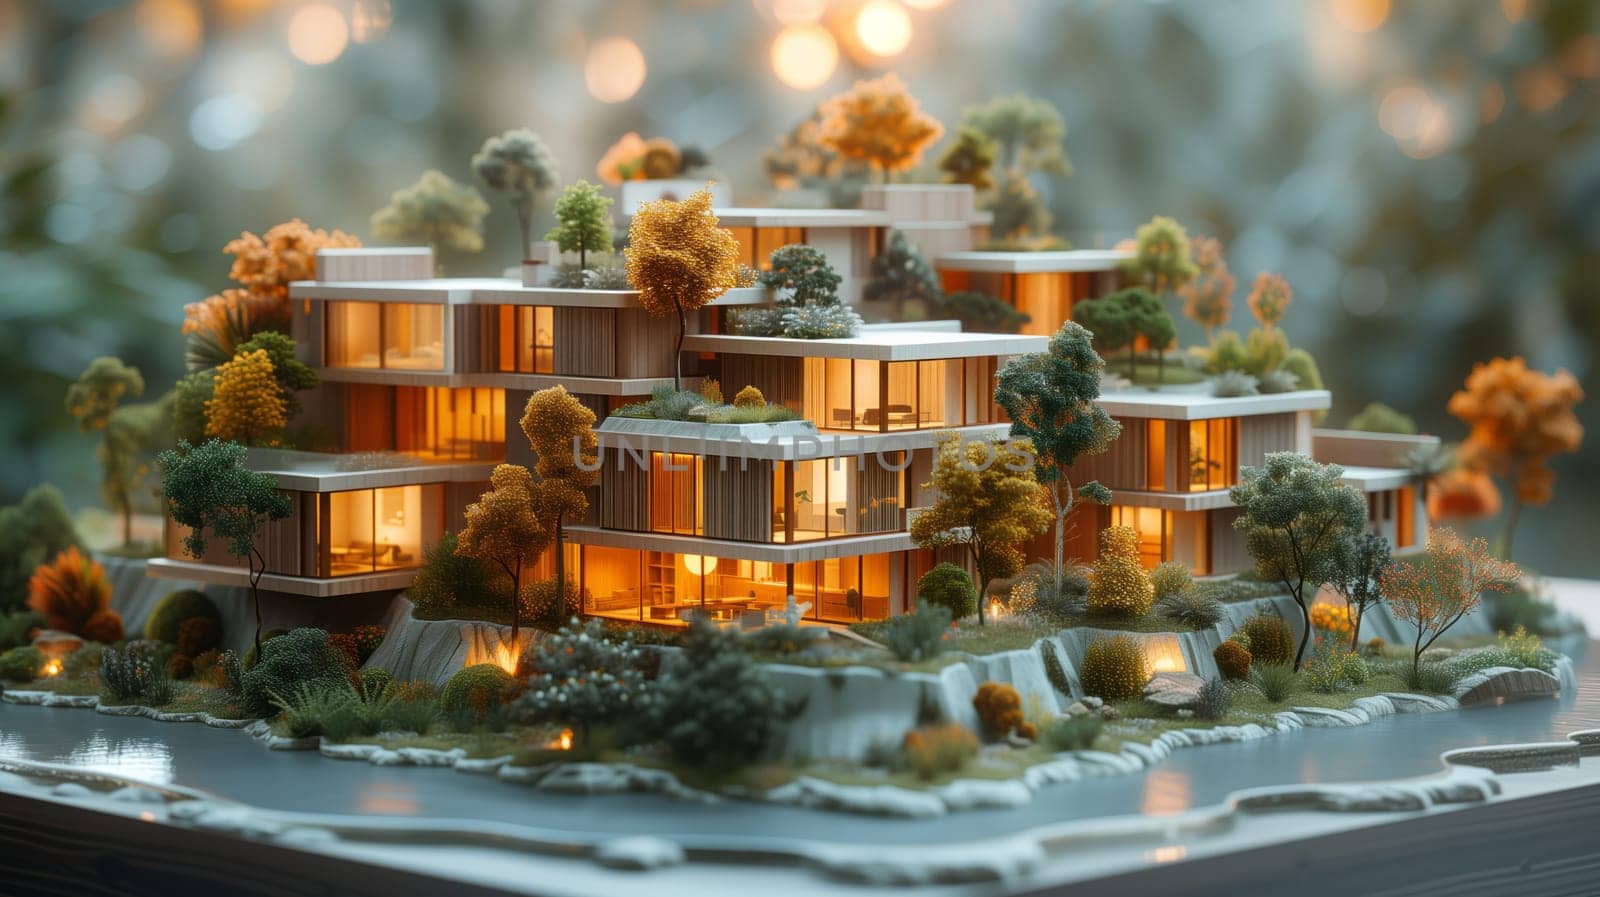 Model of urban building with rooftop trees displayed on table by richwolf